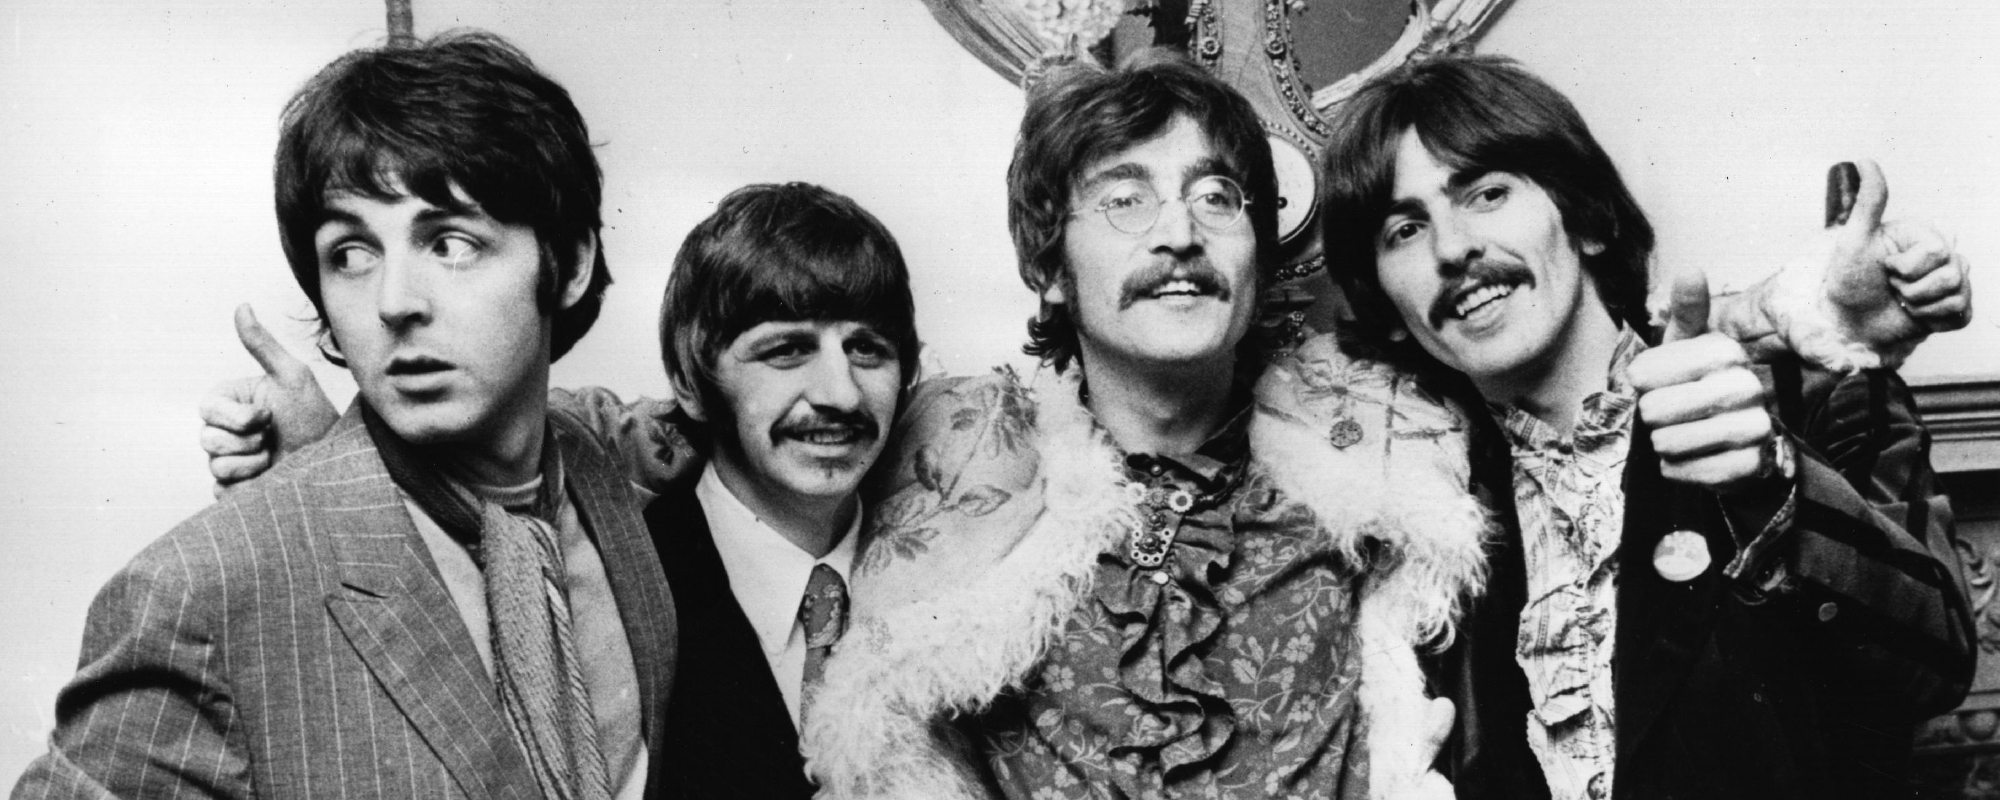 What Made The Beatles Successful Songwriters?